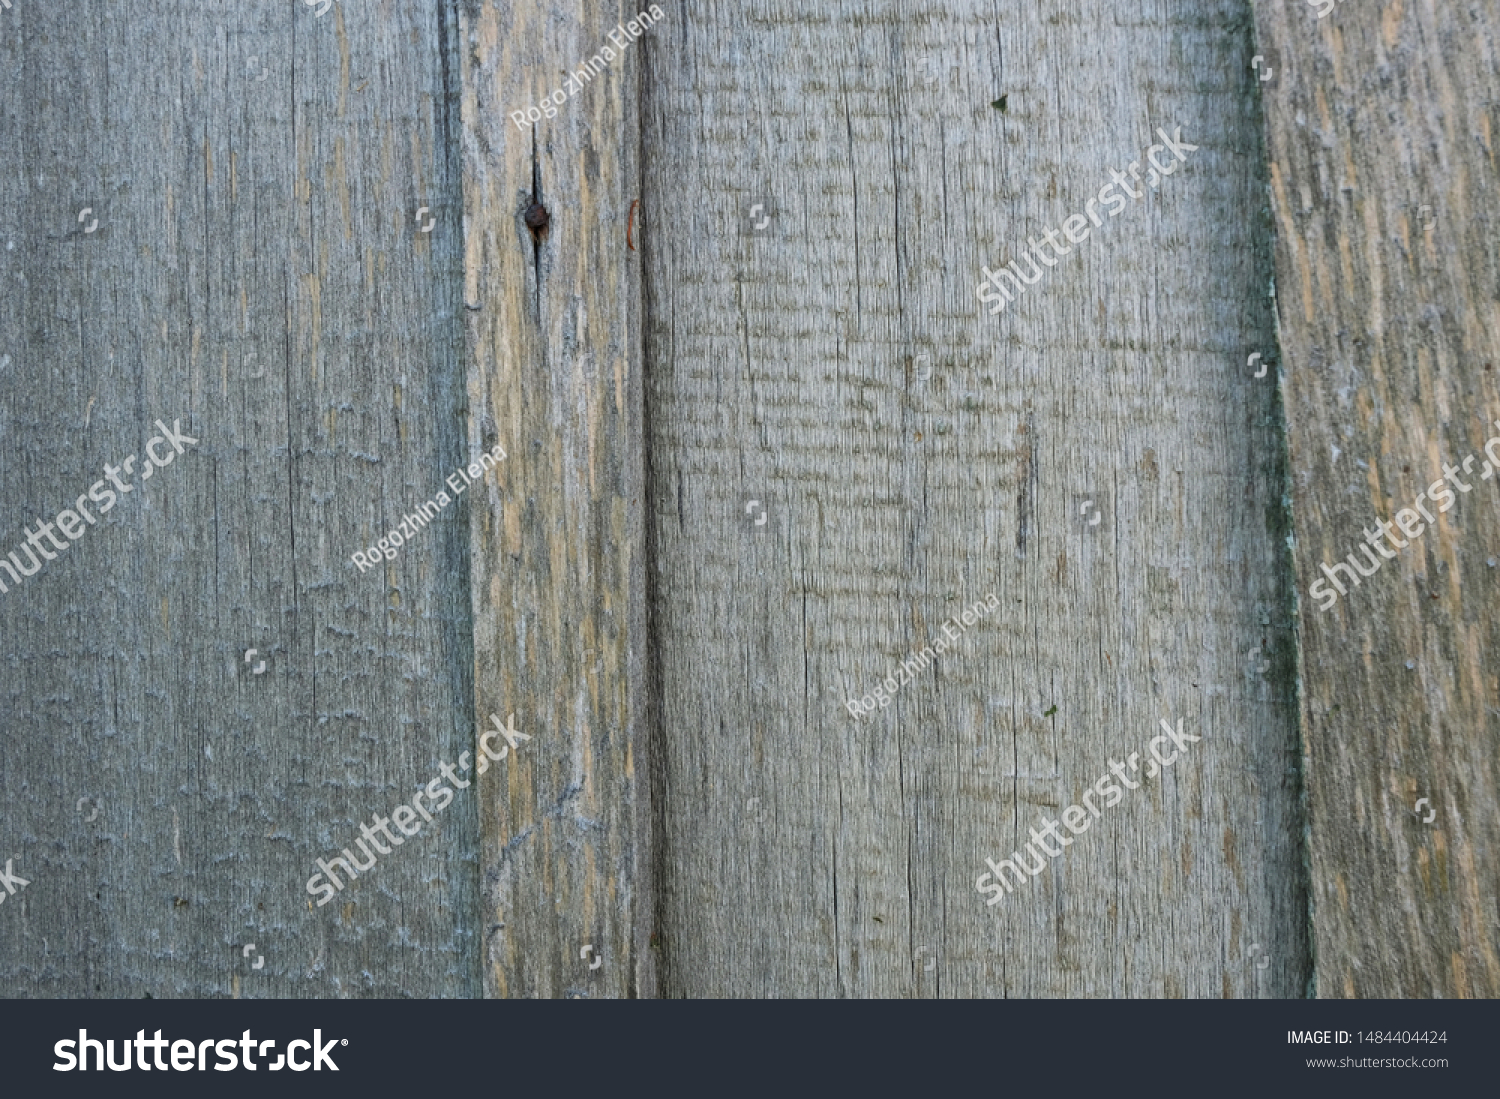 Old, gray weathered boards. A fence of retro bars. Texture background. Сlose-up. Horizontal. #1484404424